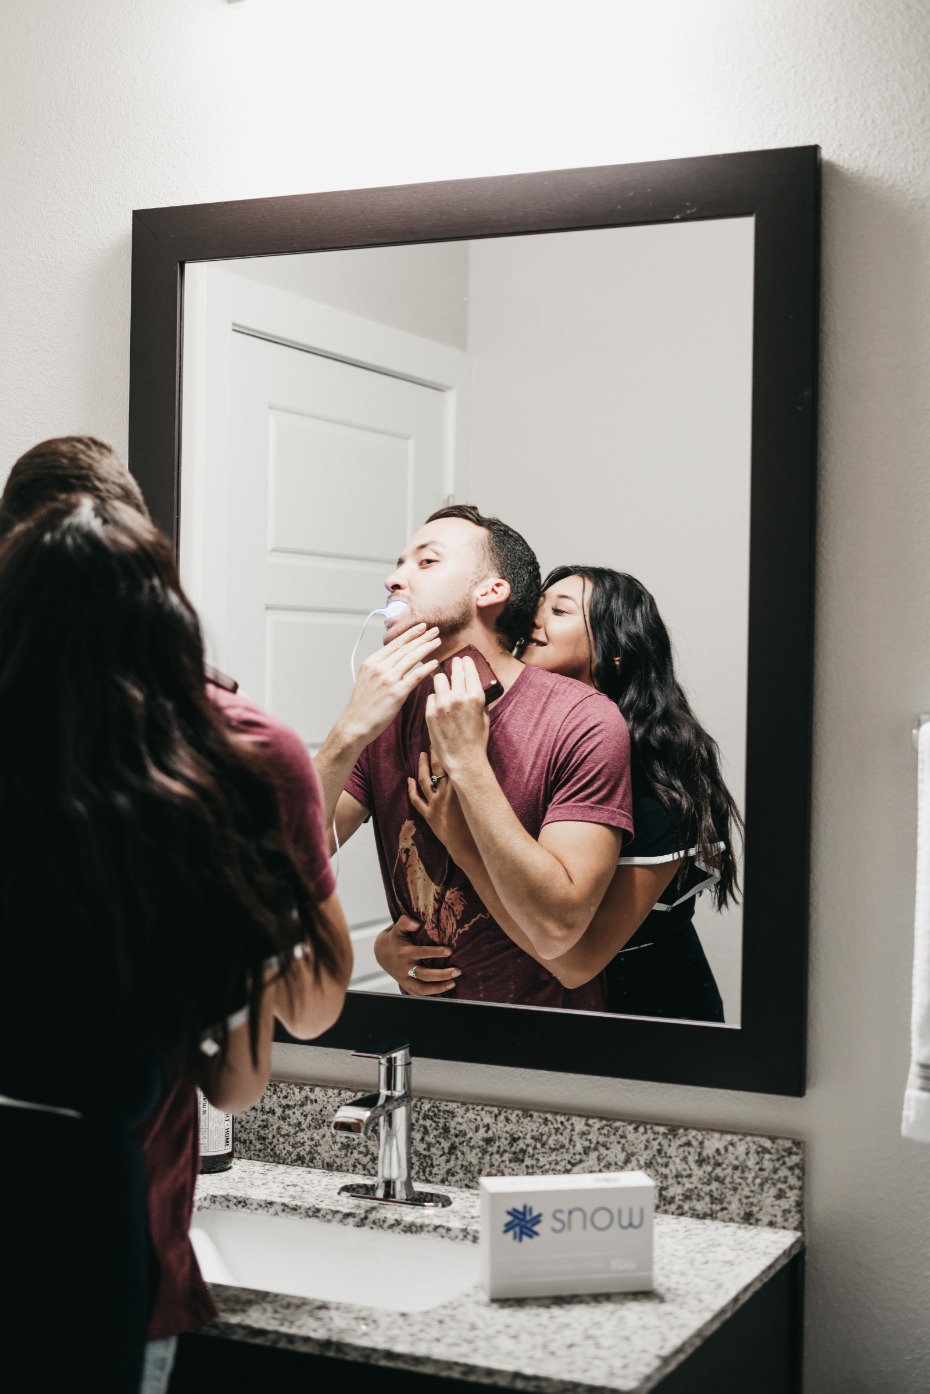 Snow Teeth Whitening Couple Embracing at the Bathroom Mirror He's Multitasking